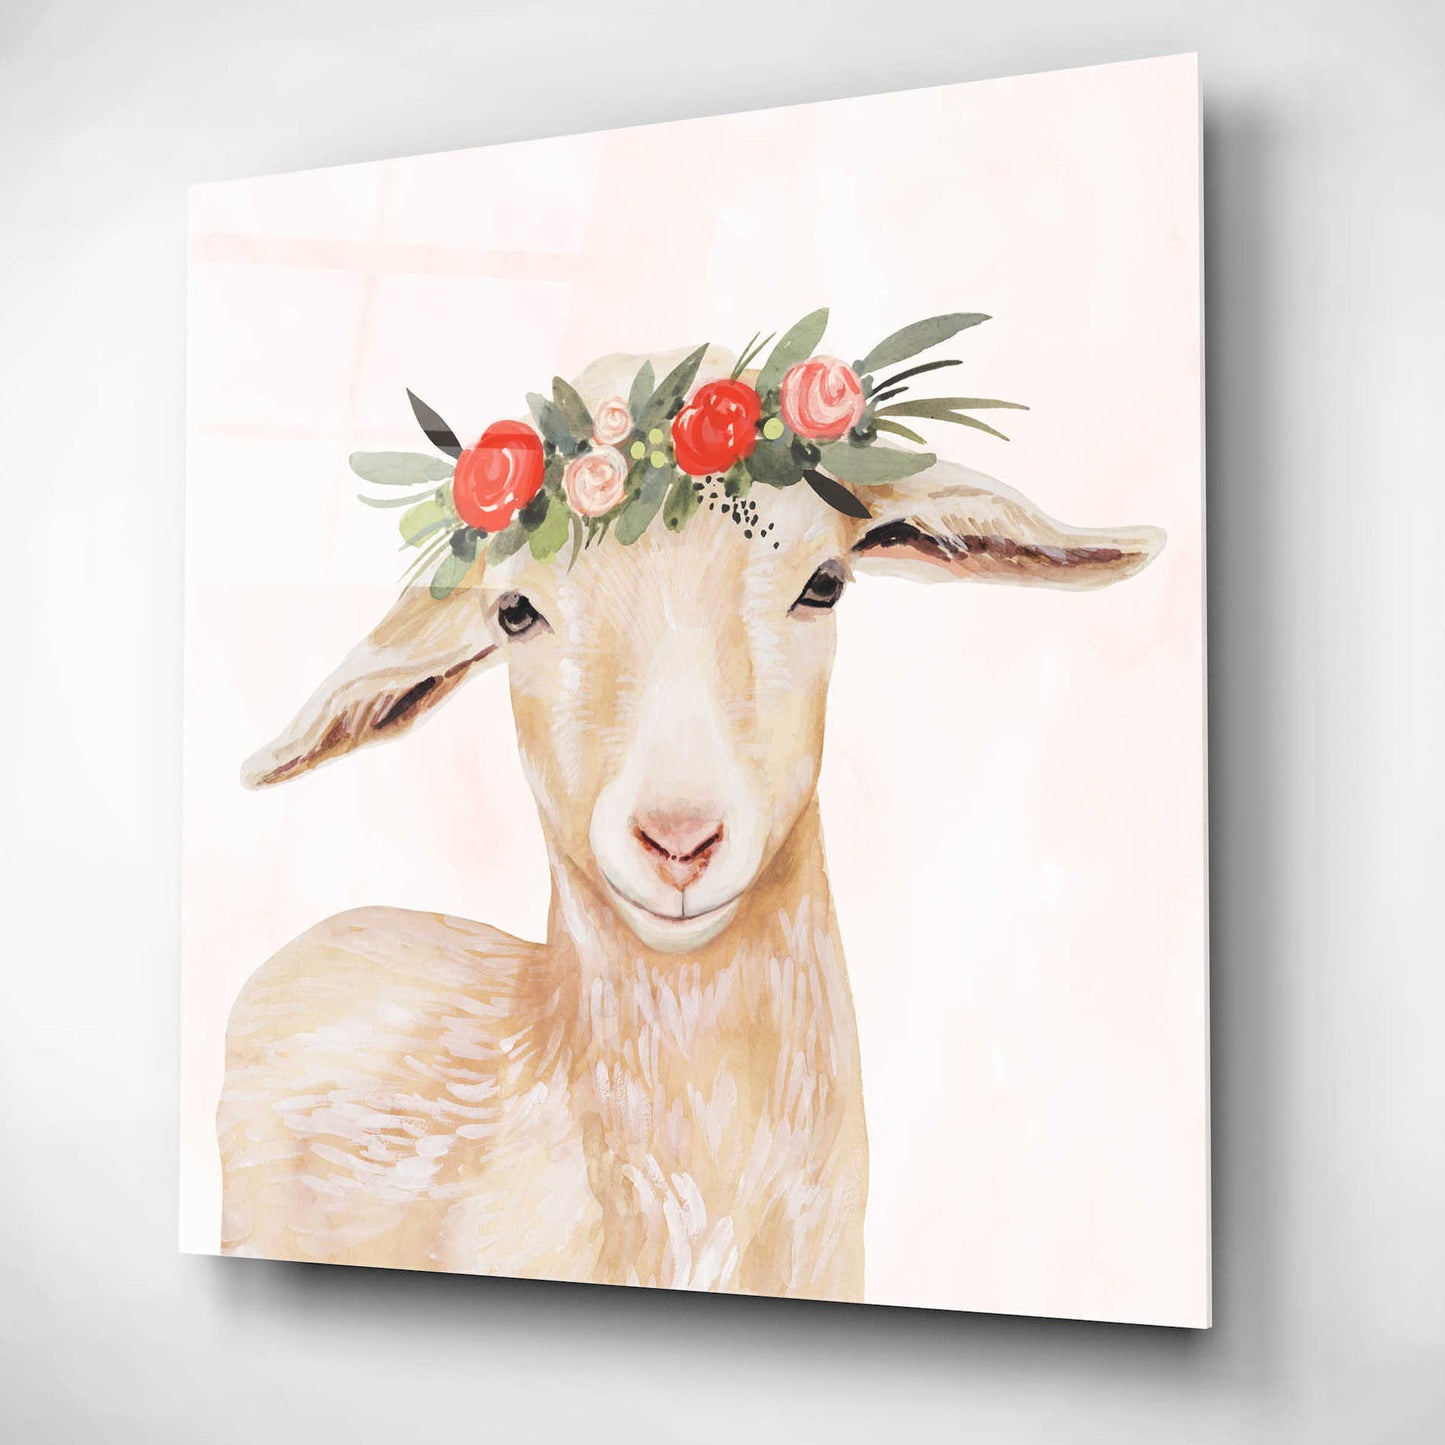 Epic Art 'Garden Goat I' by Victoria Borges, Acrylic Glass Wall Art,12x12